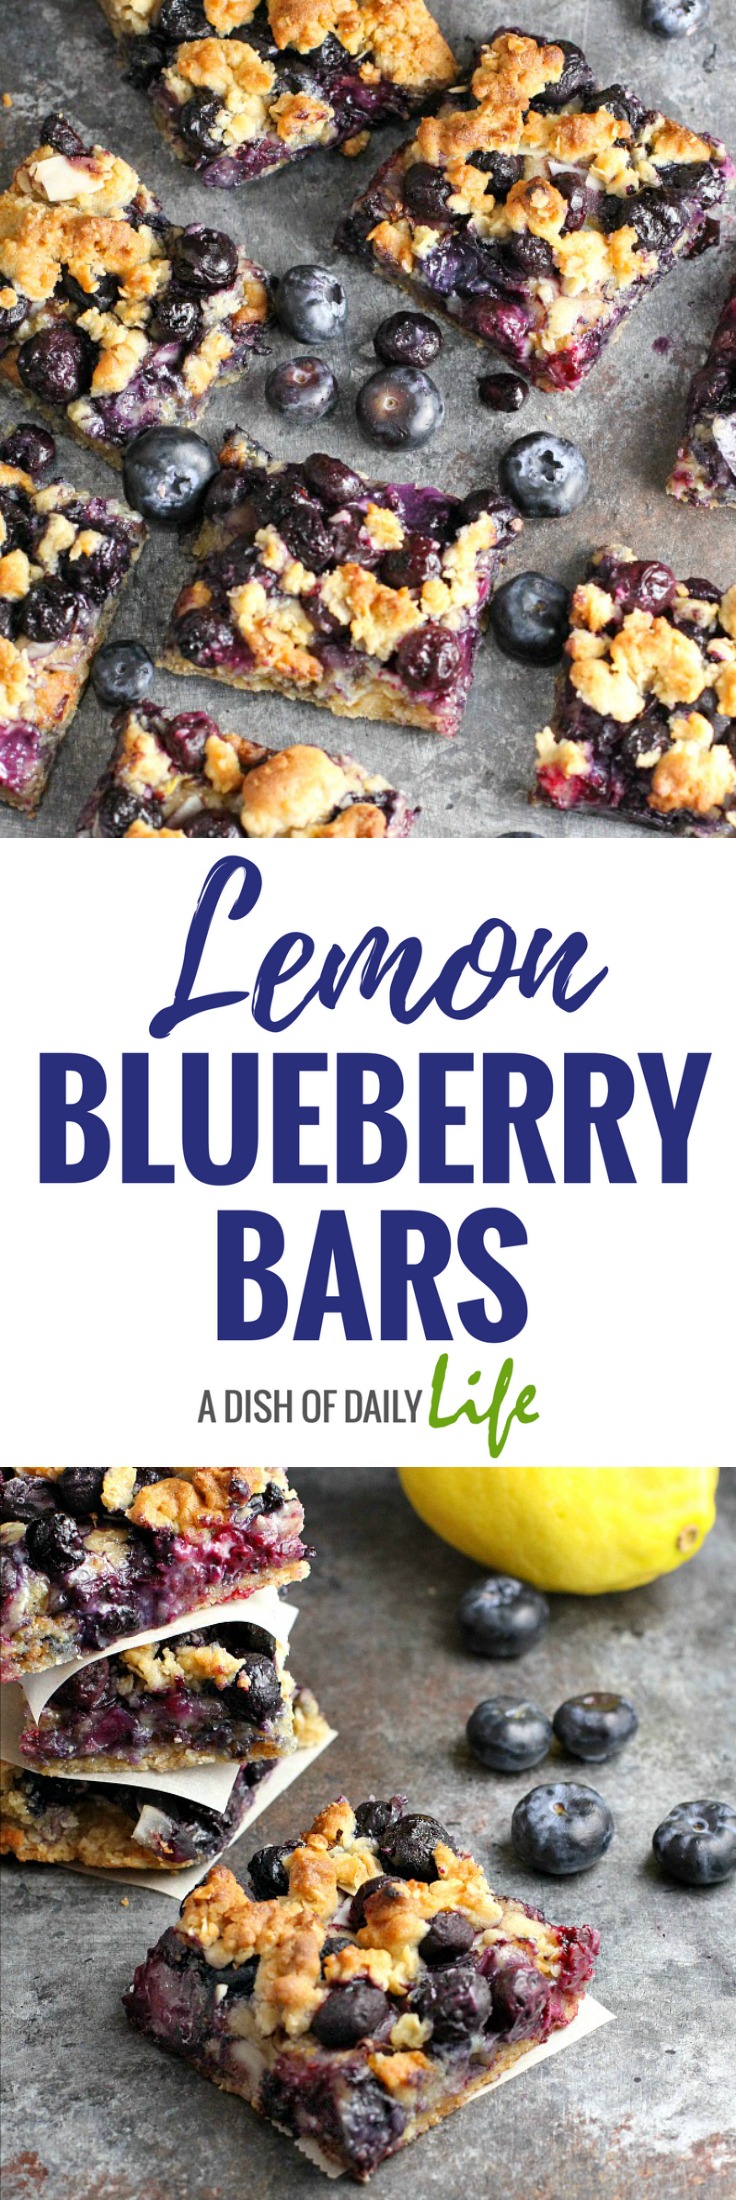 Lemon Blueberry Bars...lemon zest and blueberries combine with a delicious oatmeal crust for a scrumptious treat the whole family will love! Dessert | Fruity desserts | bar cookies | cookie bars | baking with fruit | easy desserts | Blueberries 